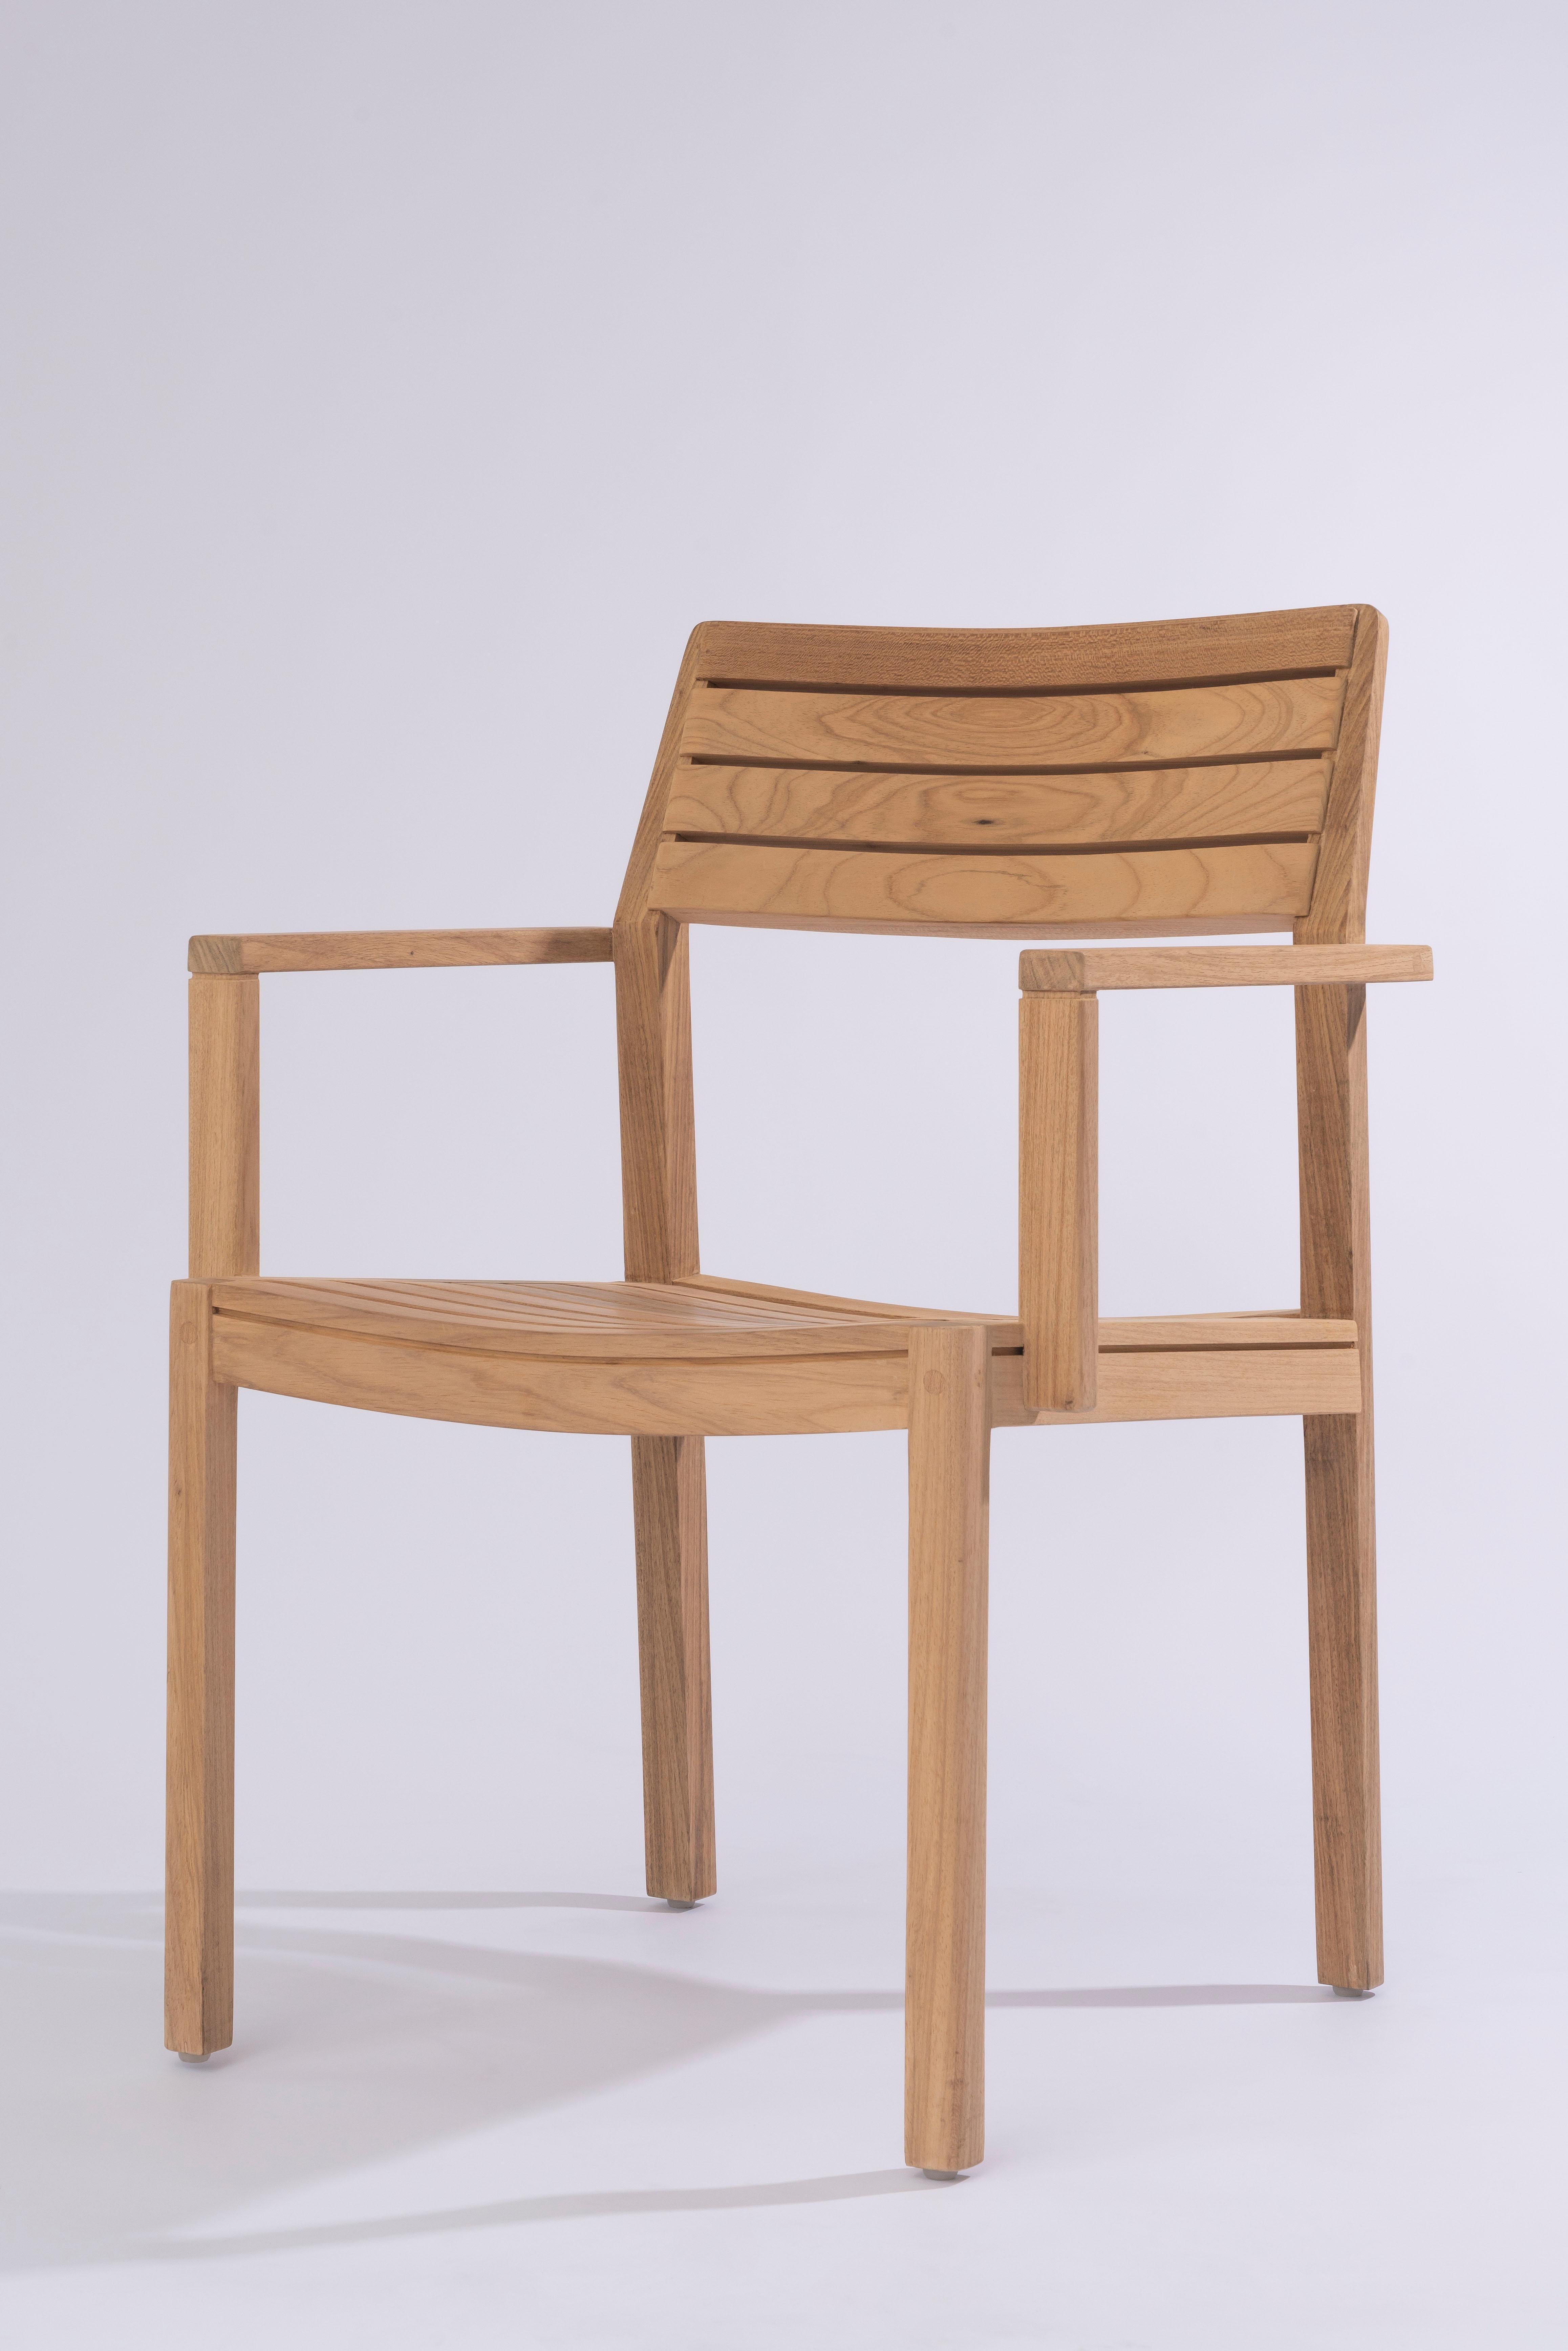 Solid Wood Chair in Teak, with Wooden Slats, for the Outside, Outdoor Resistant  For Sale 2